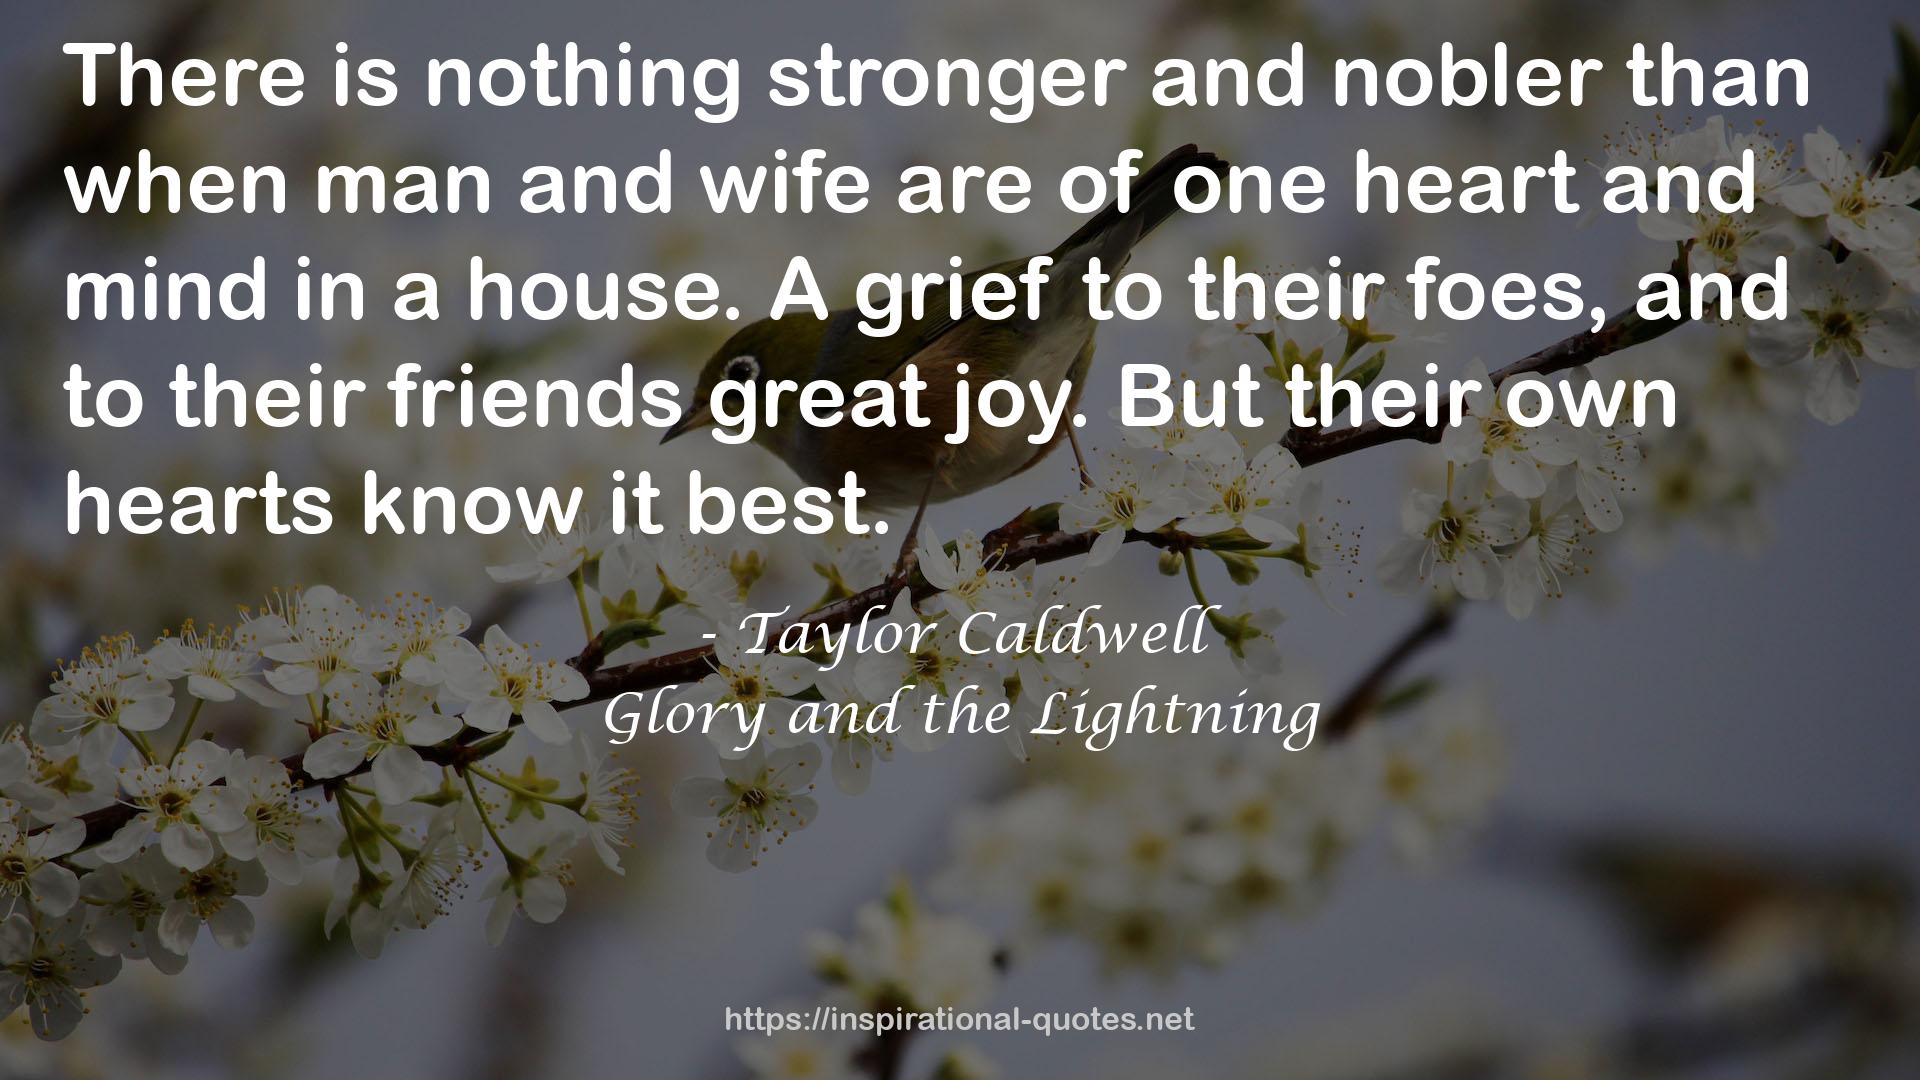 Glory and the Lightning QUOTES